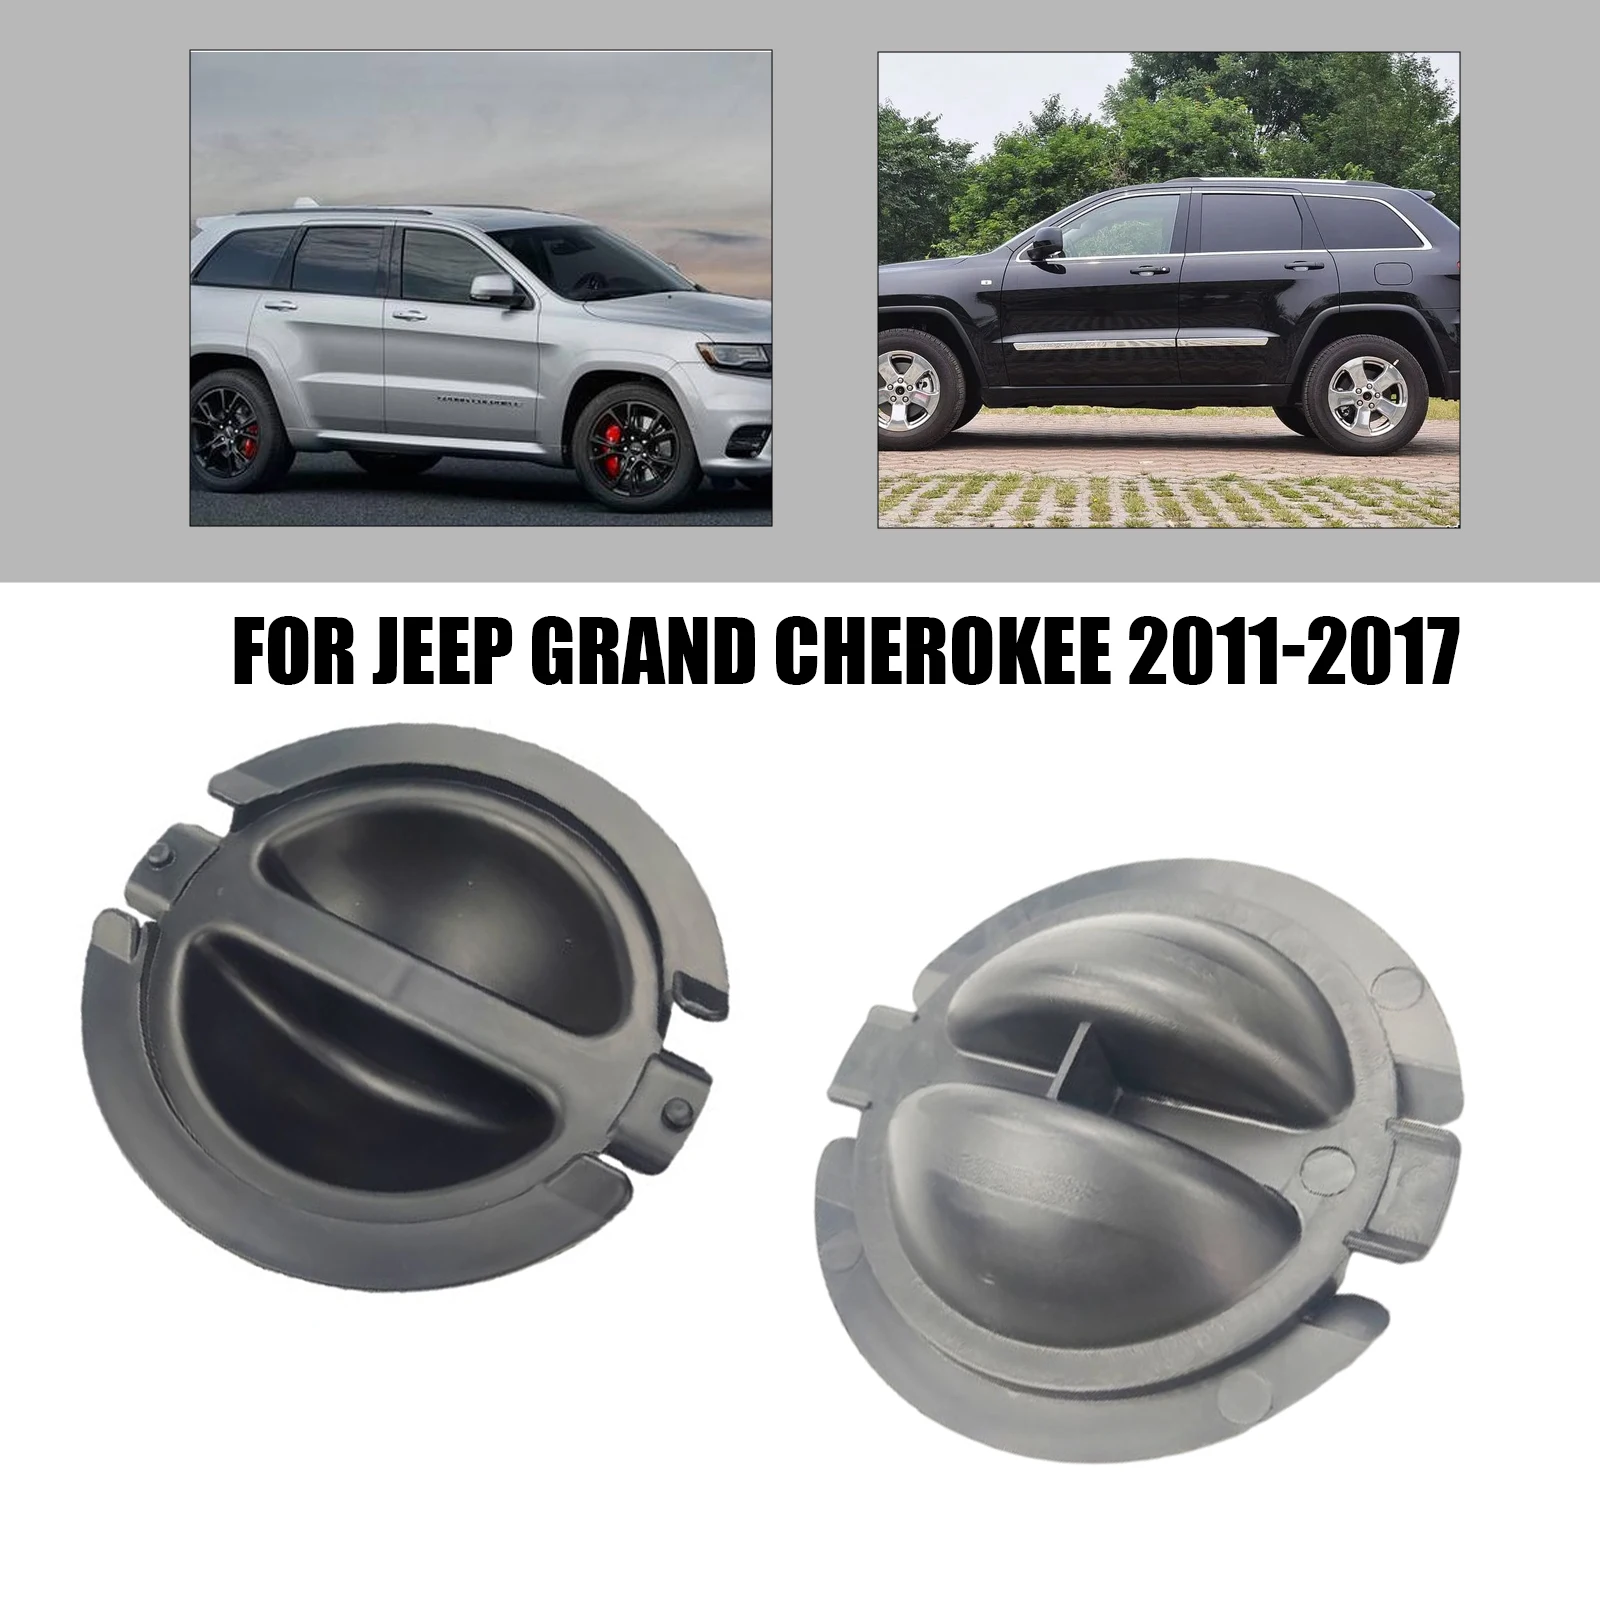 

Front Laf Plate Lining Cover Plate Fog Lamp Observation Port For Jeep Grand Cherokee Large Cutting Mud Retaining Lining Cap